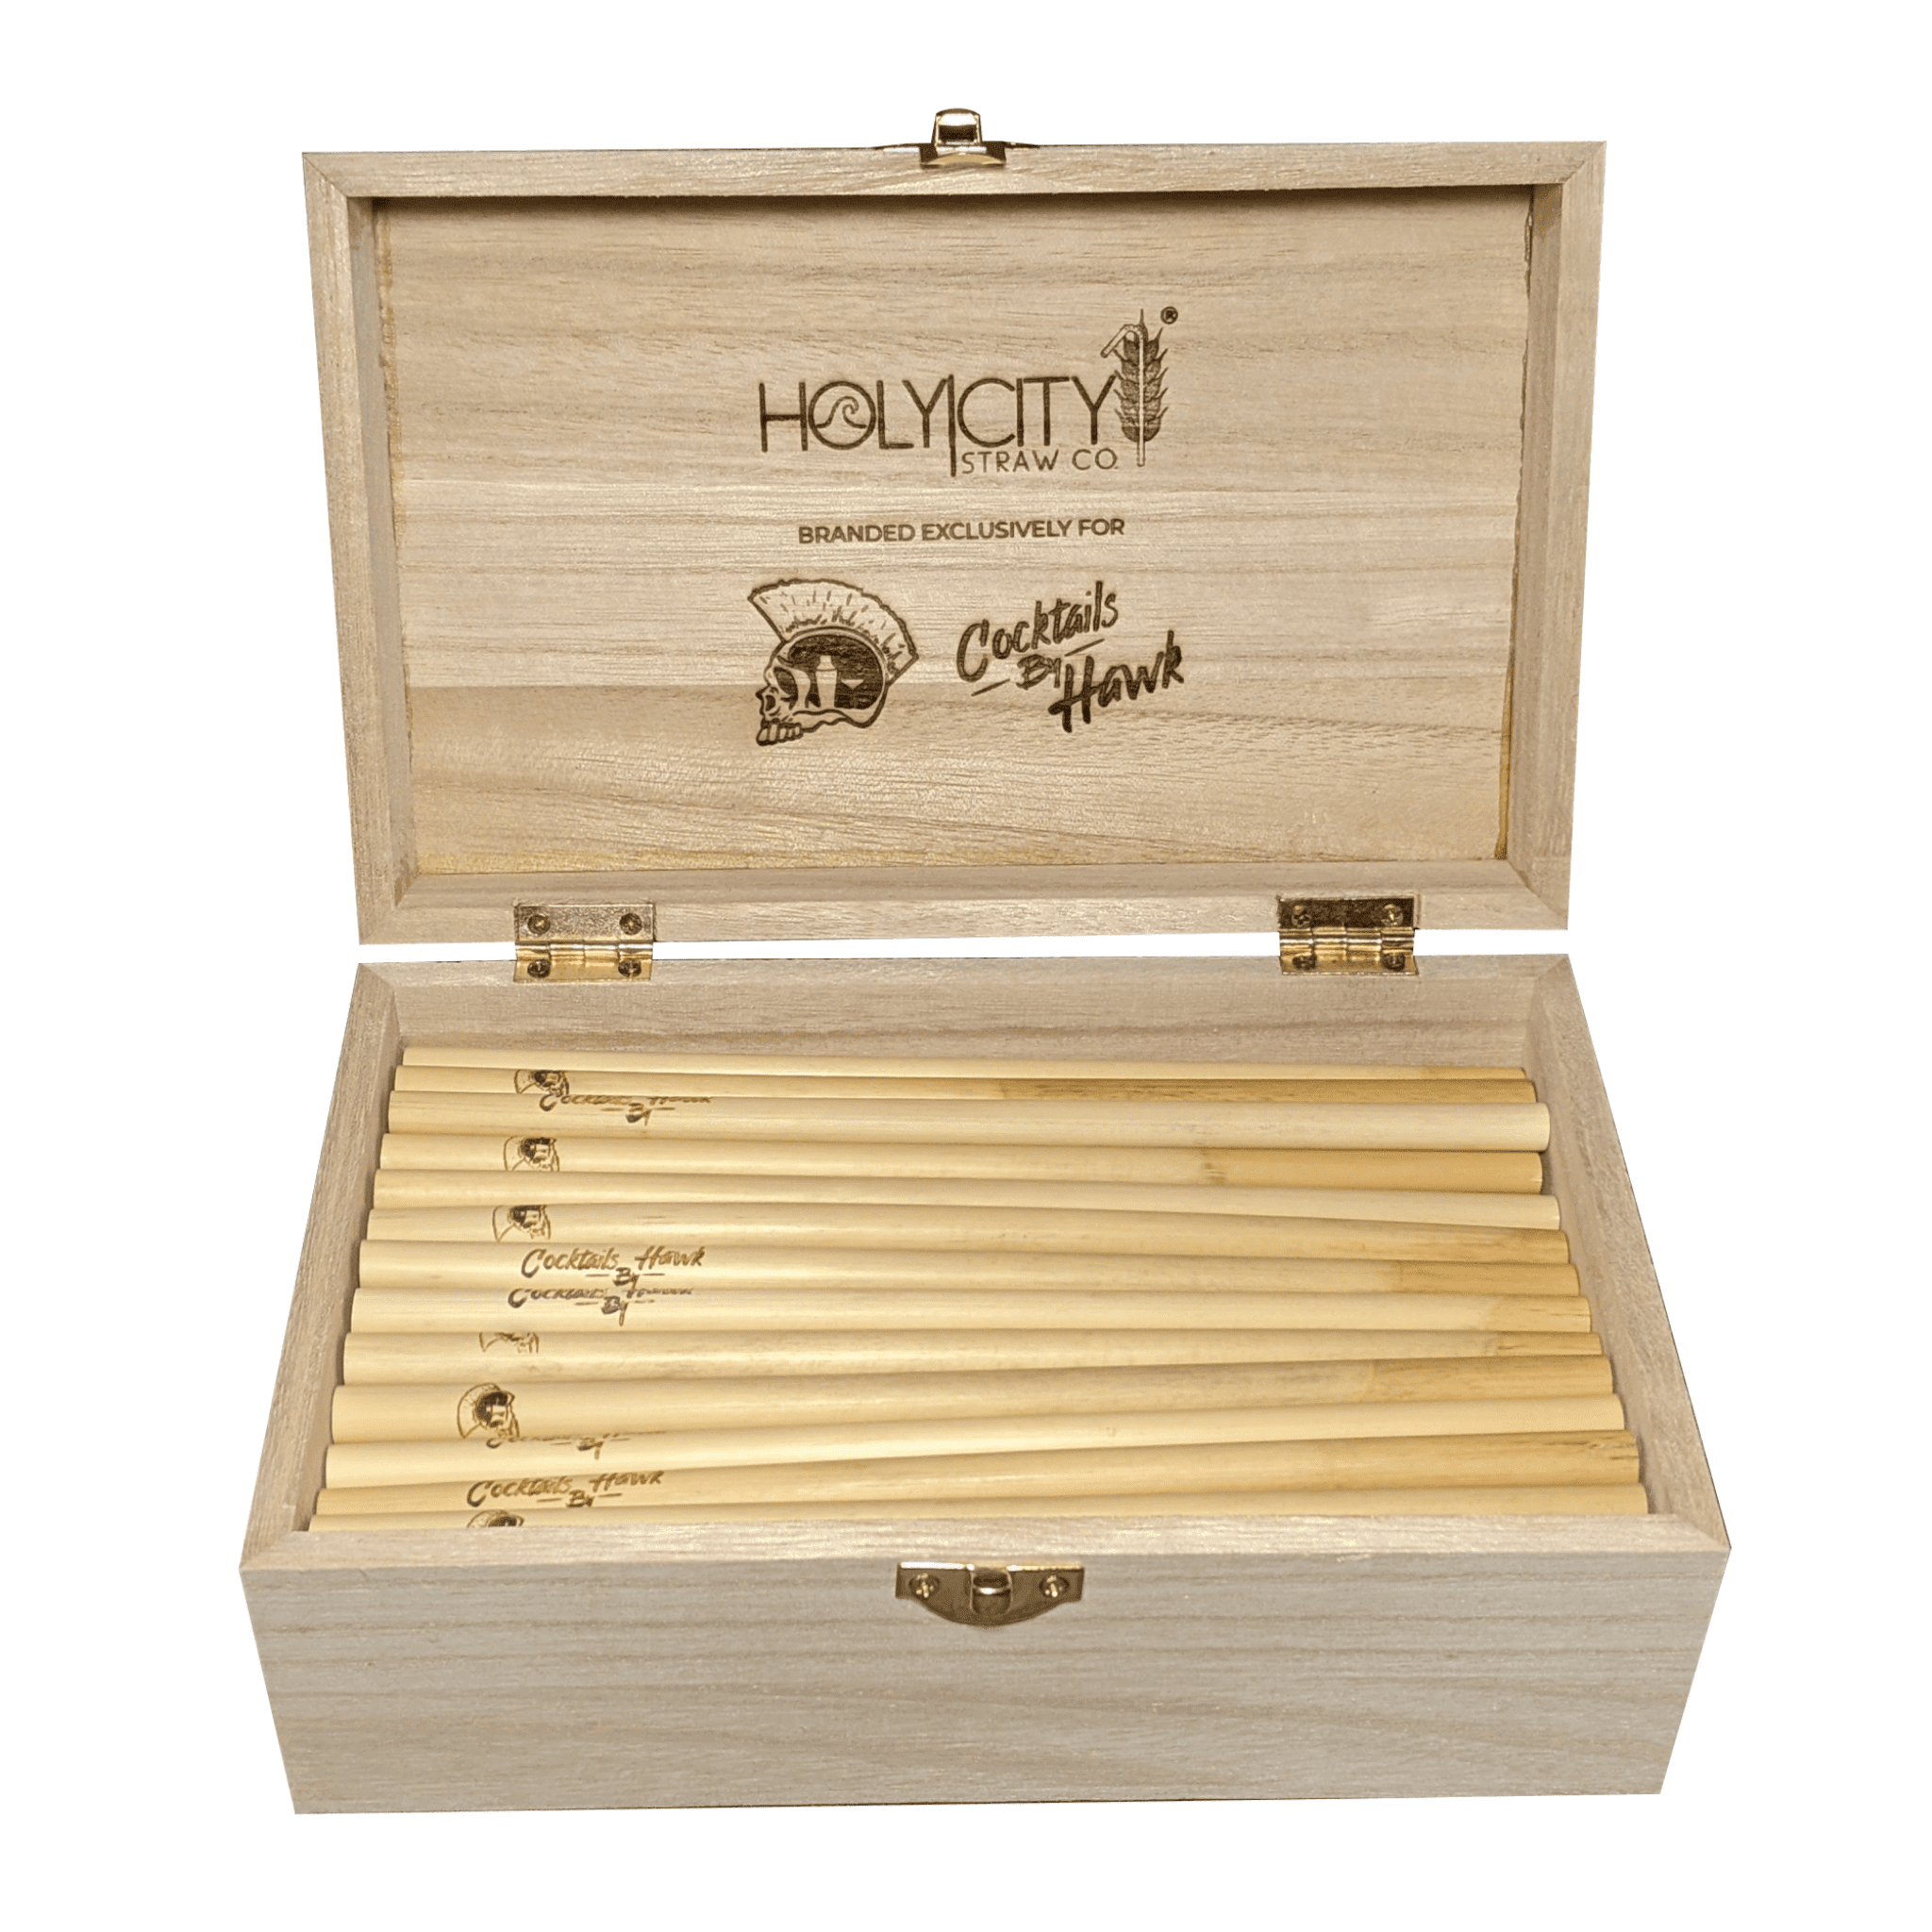 Cocktails by Hawk Custom Branded Straw Holder Box Opened with Straws Inside